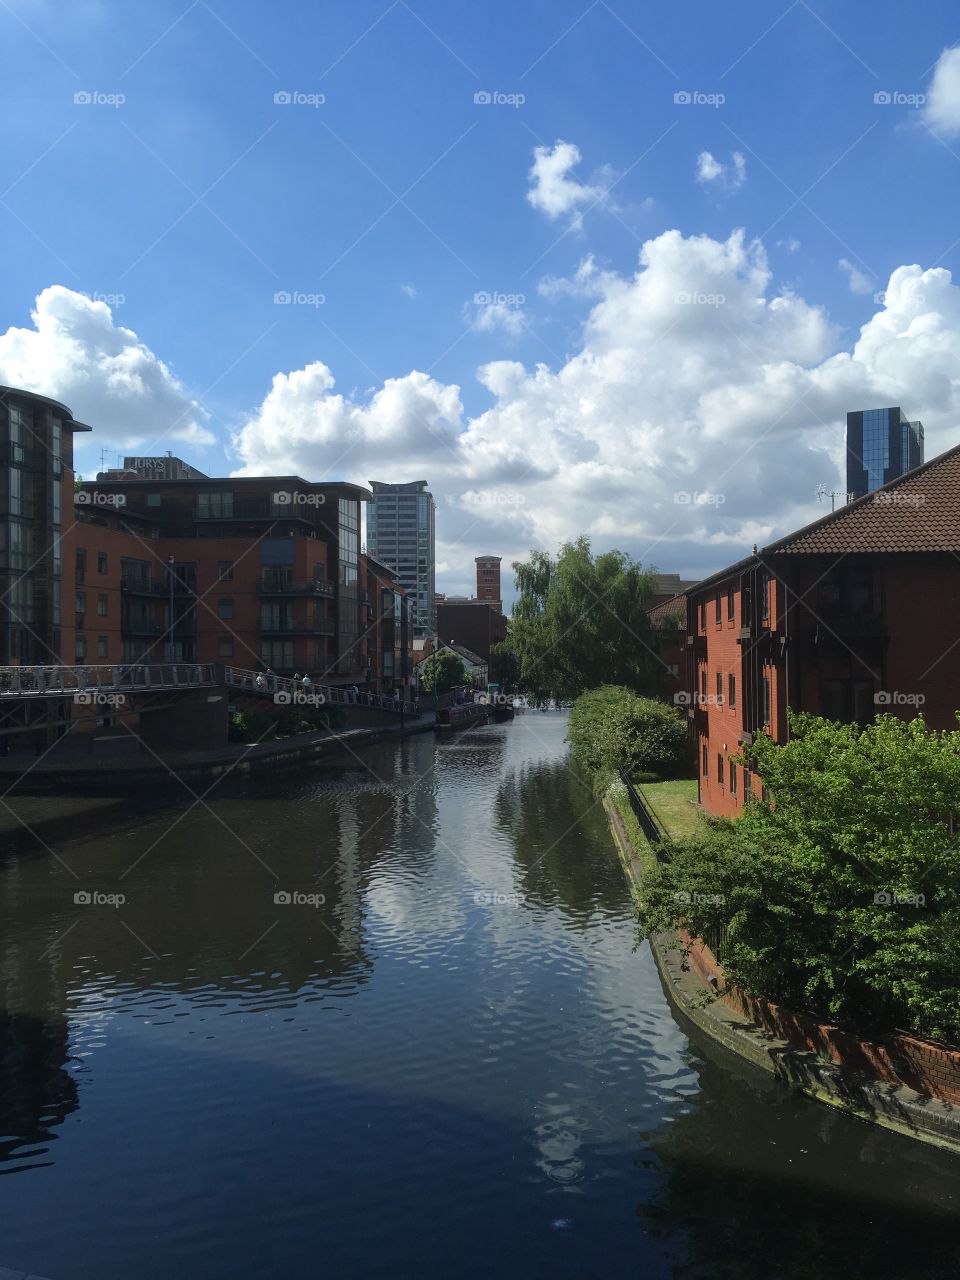 Canals in Birmingham. Did you know that Birmingham has more canals than Venice?